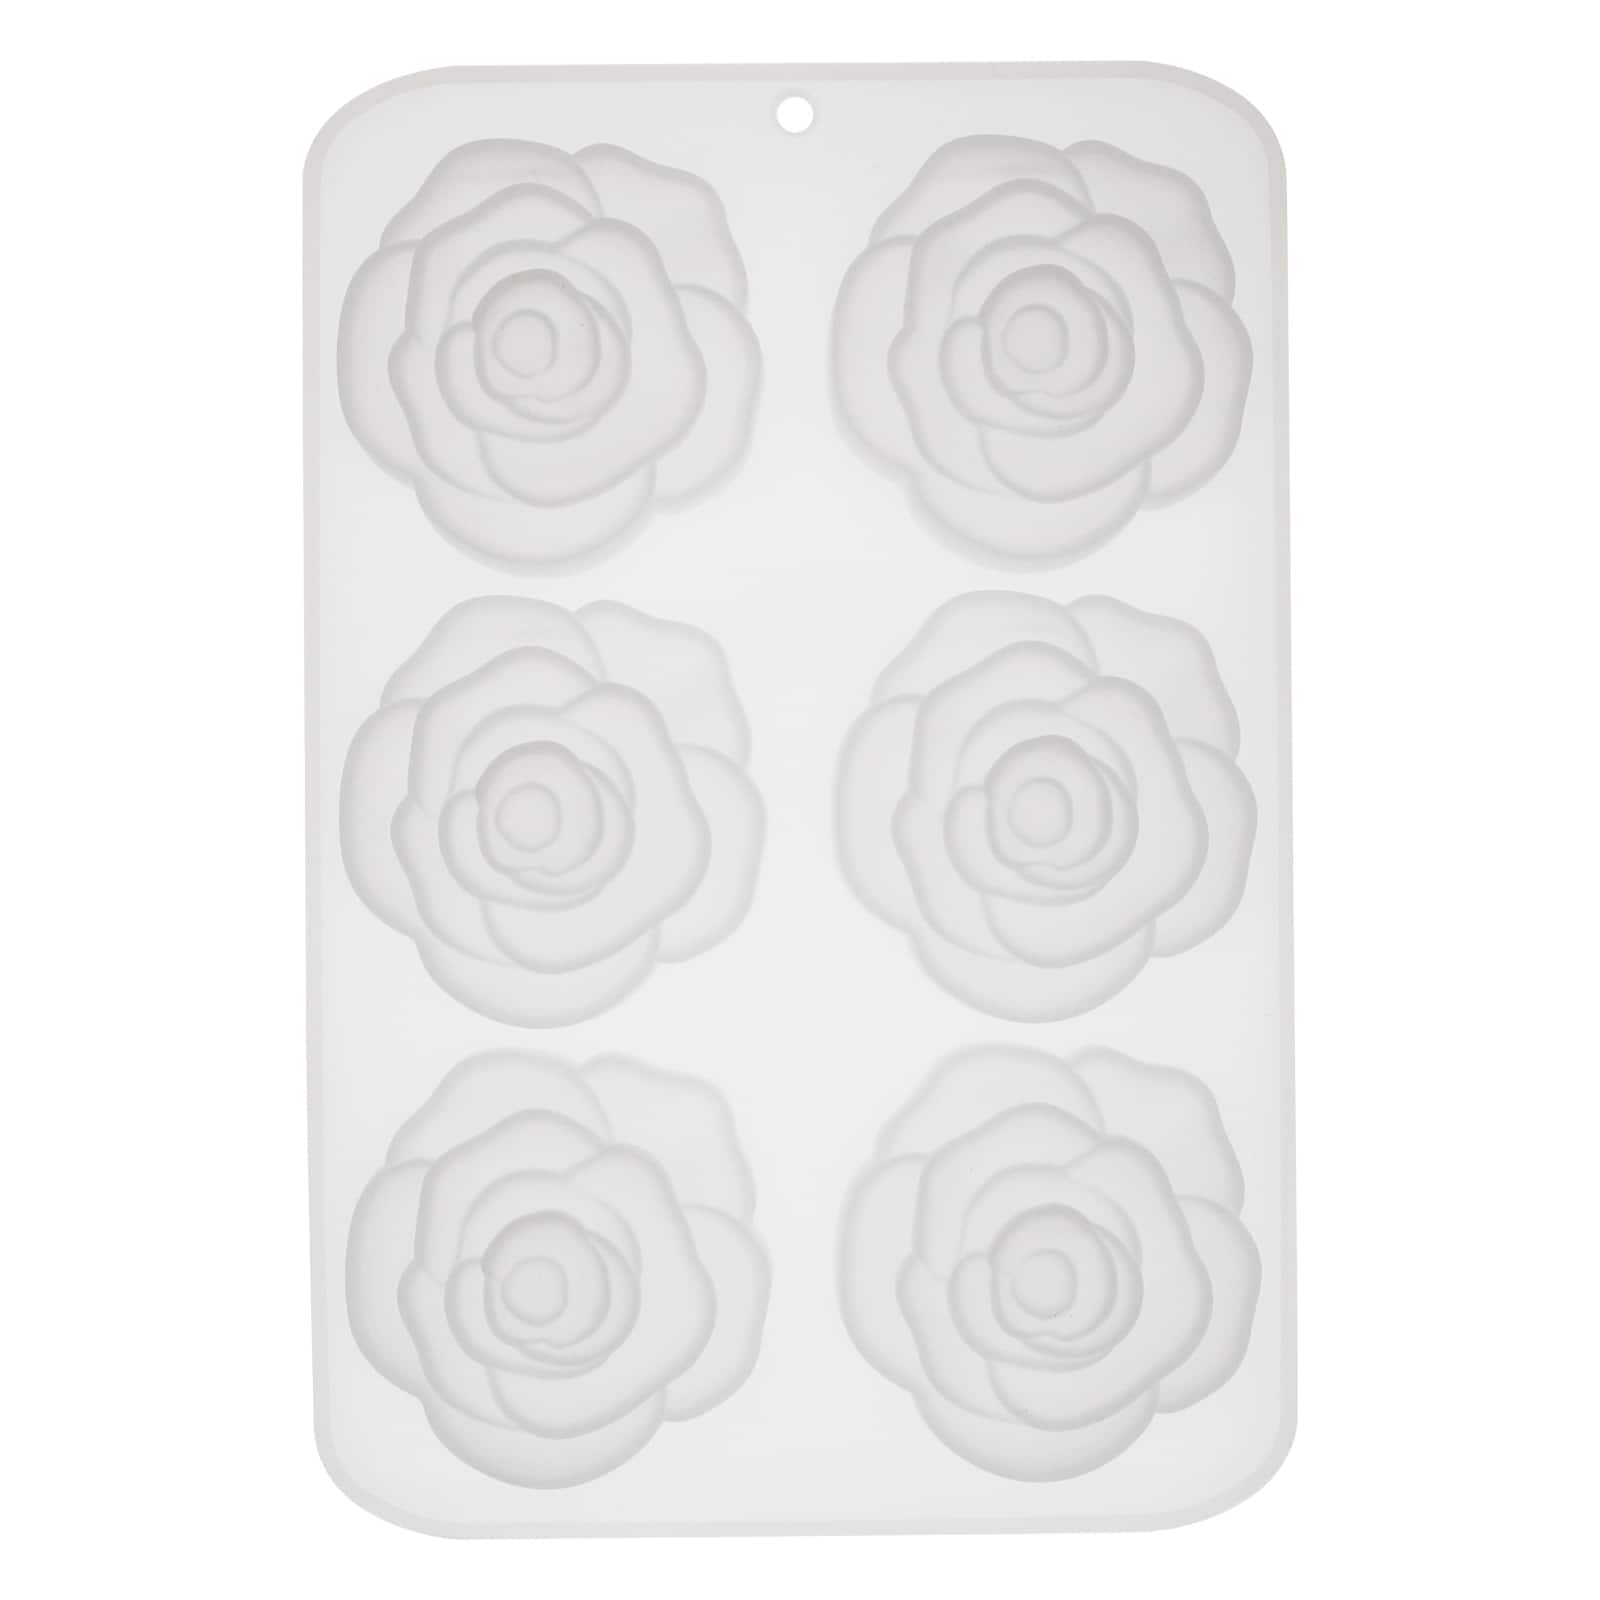 Silicone Rose Soap Mold by Make Market®